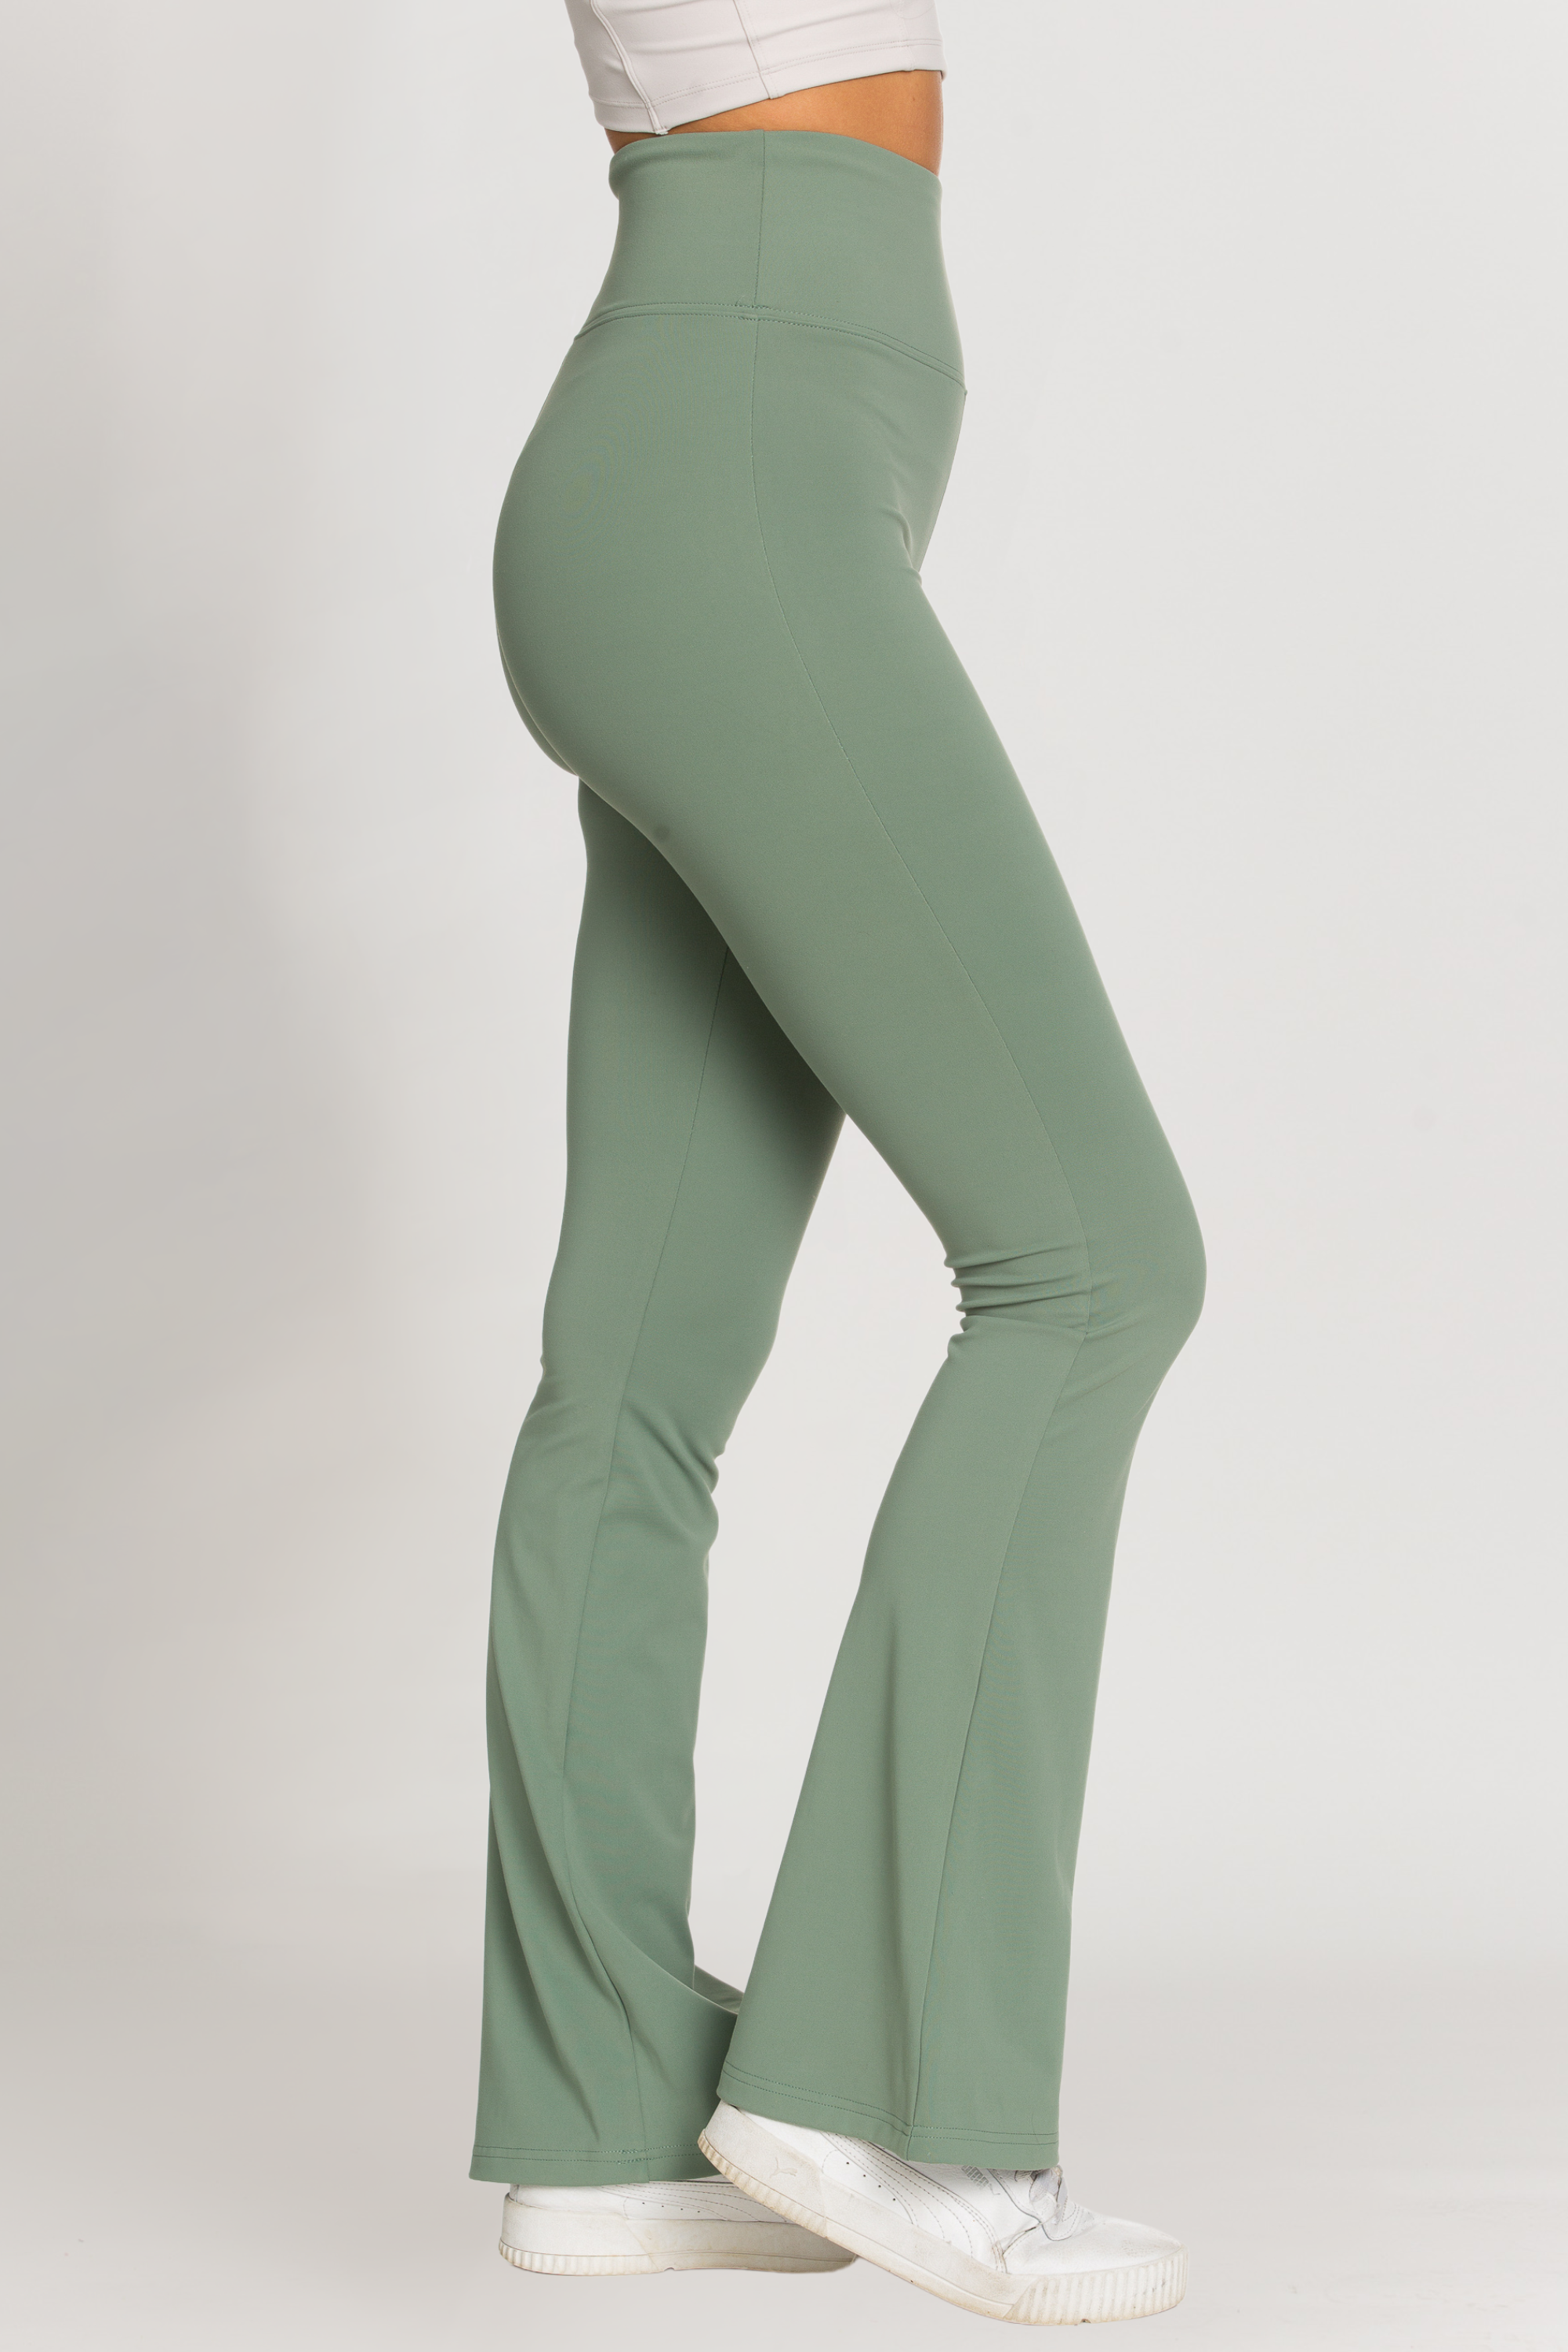 Comfort Fit High Waist Flared Yoga Pants in Teal Green with Side